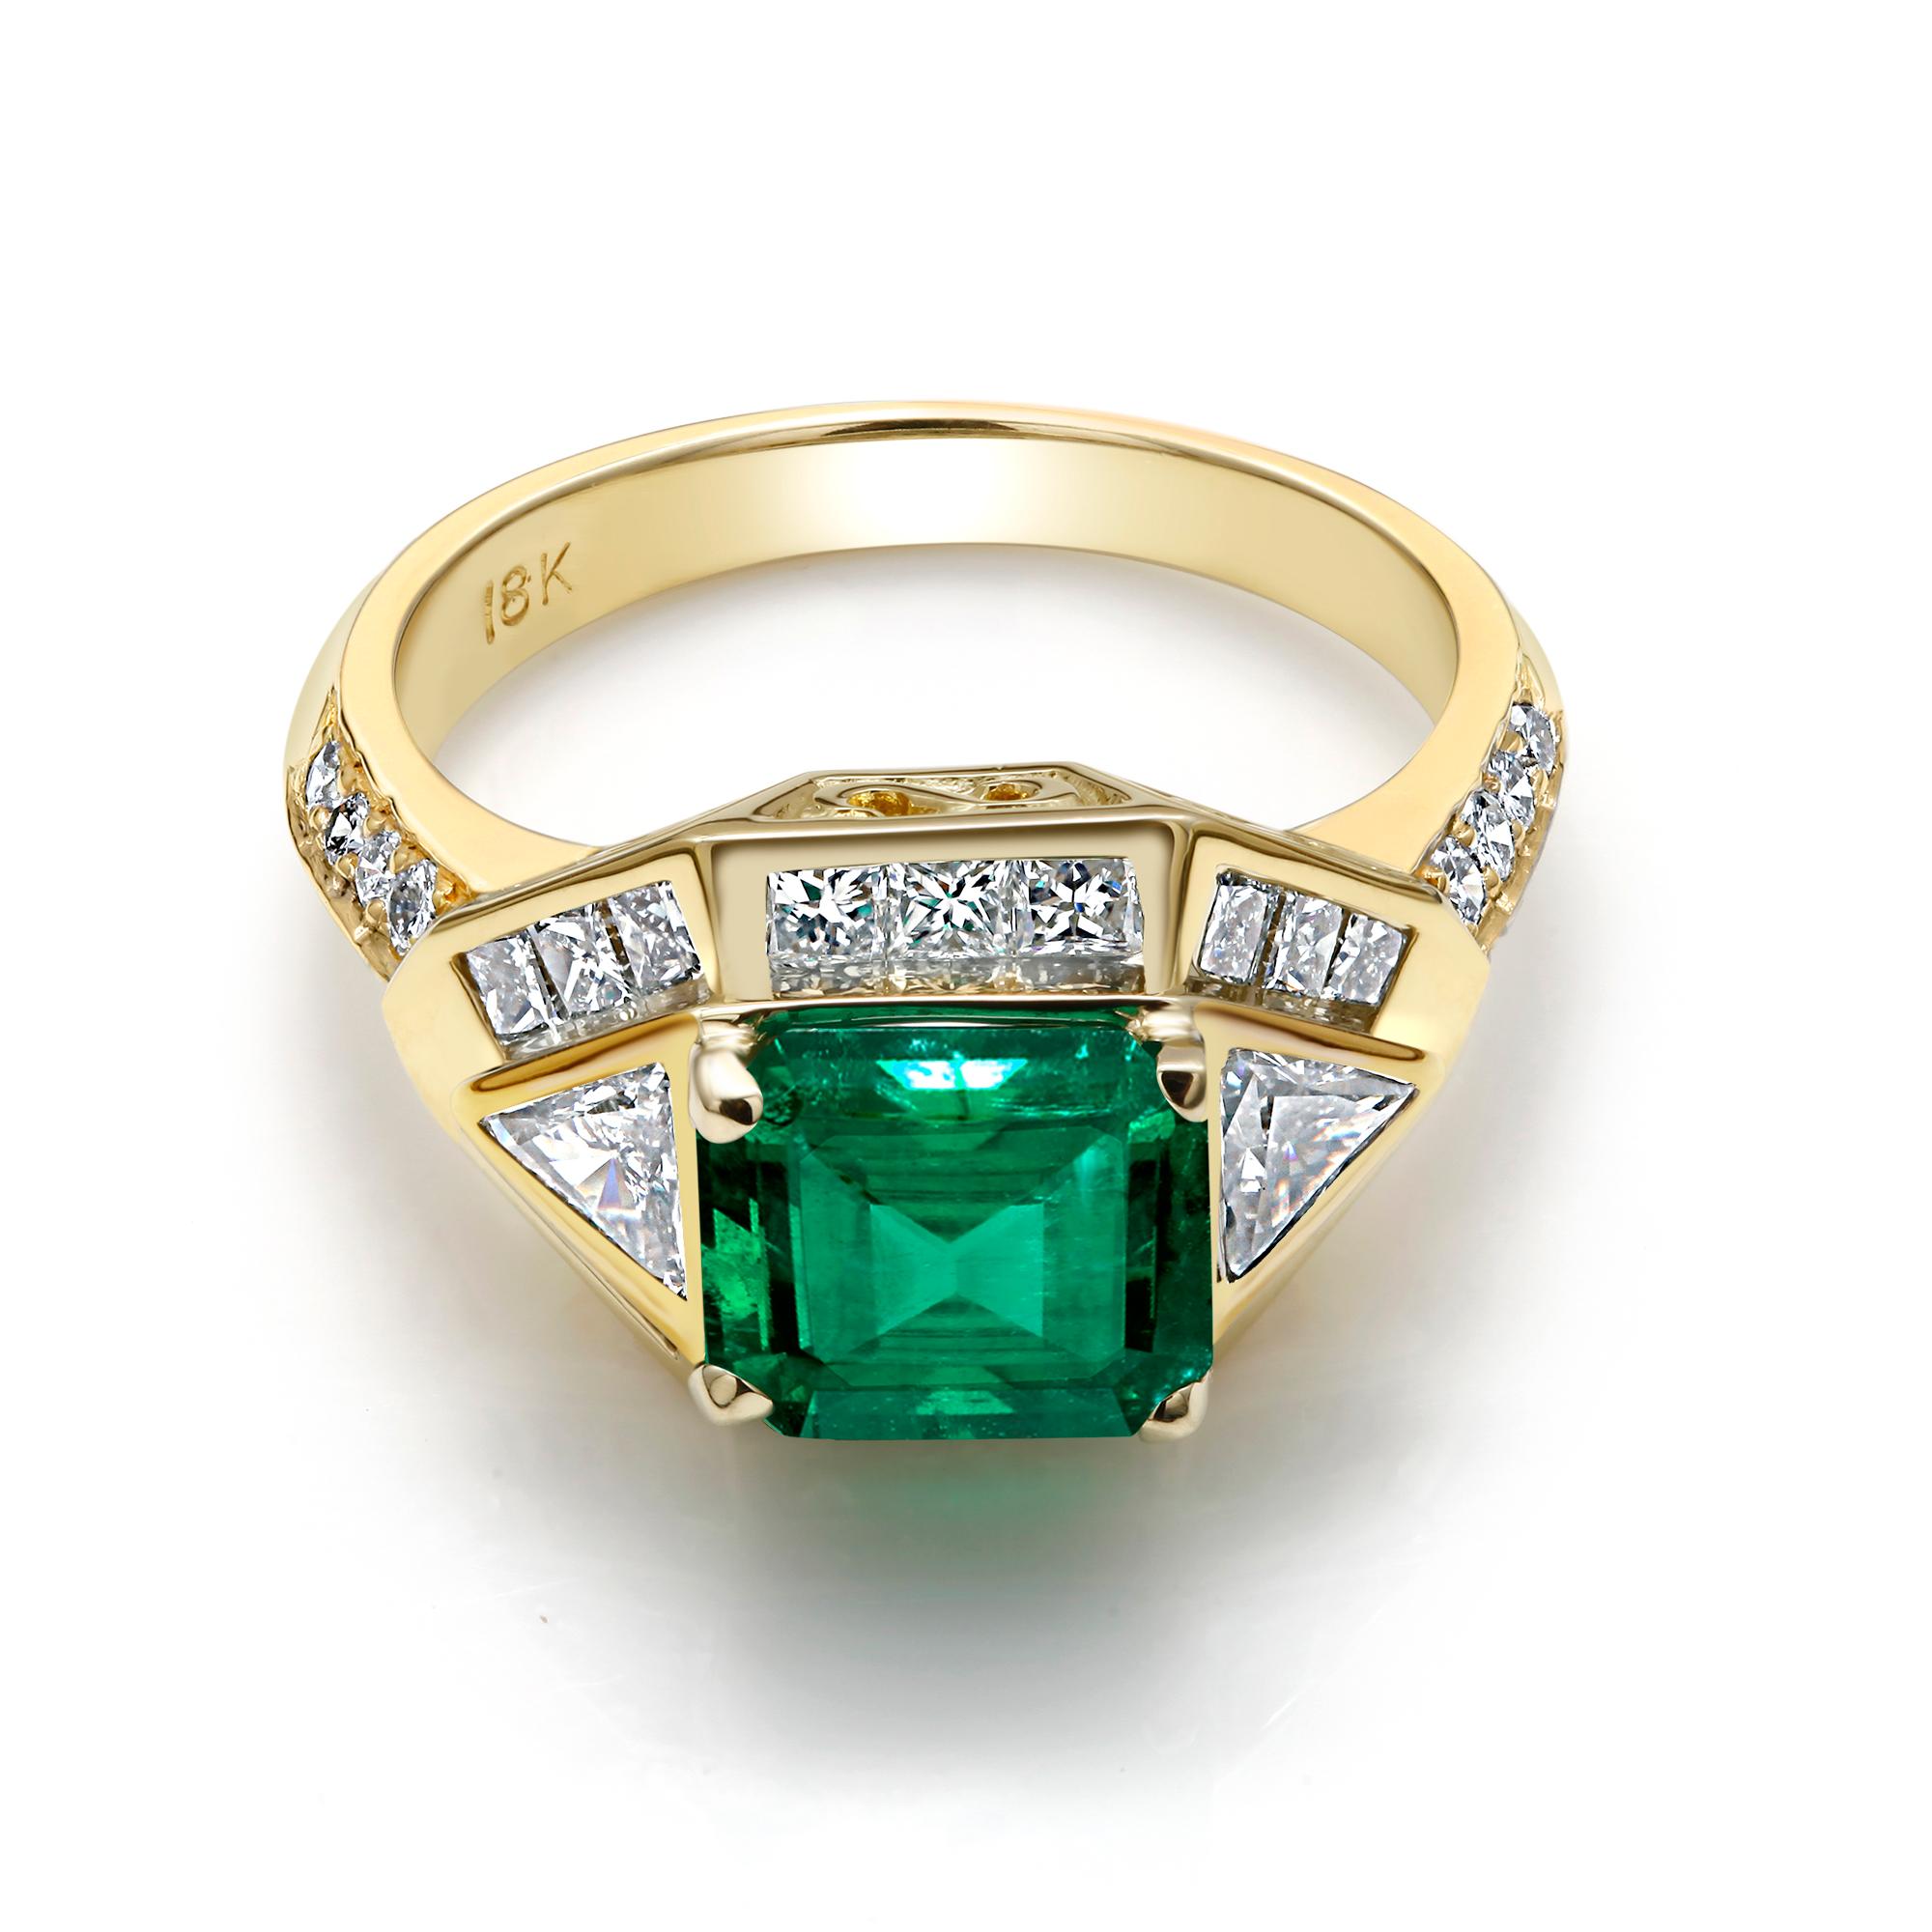 Contemporary Colombian Emerald Diamond Cocktail Ring Weighing 3.57 Carat